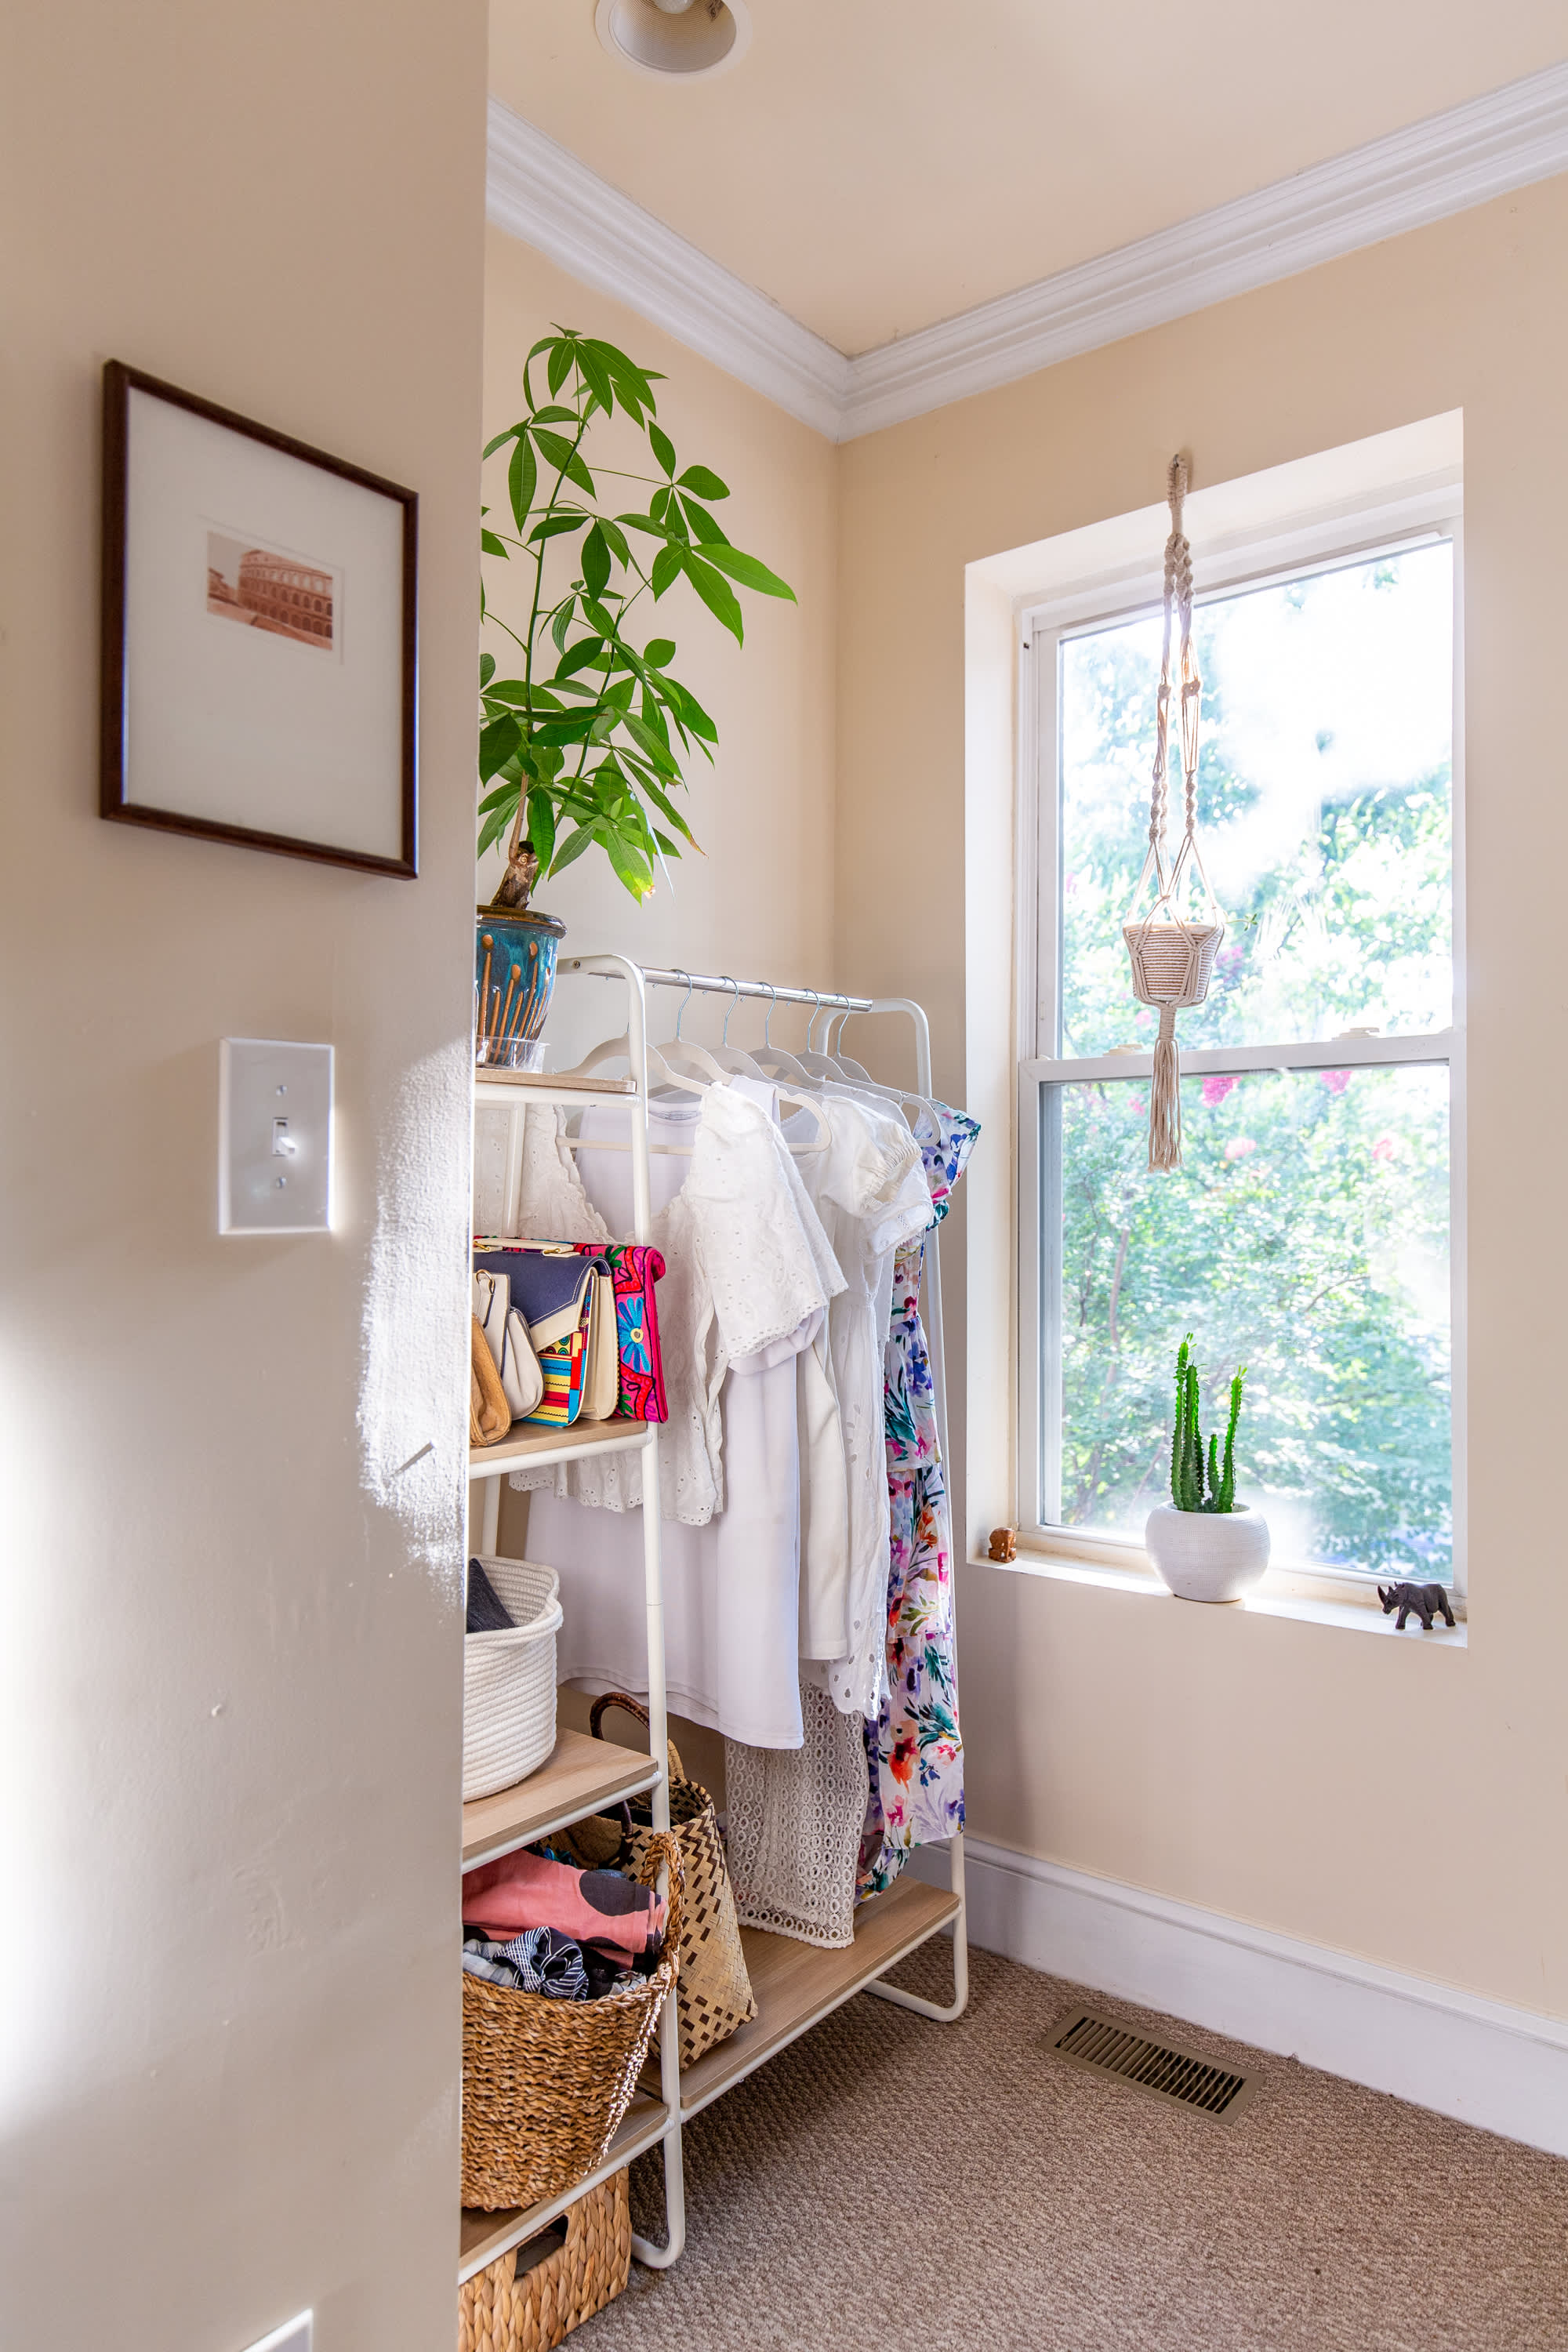 5 Clever Products To Help You Organize A Small Bedroom – Kitchen